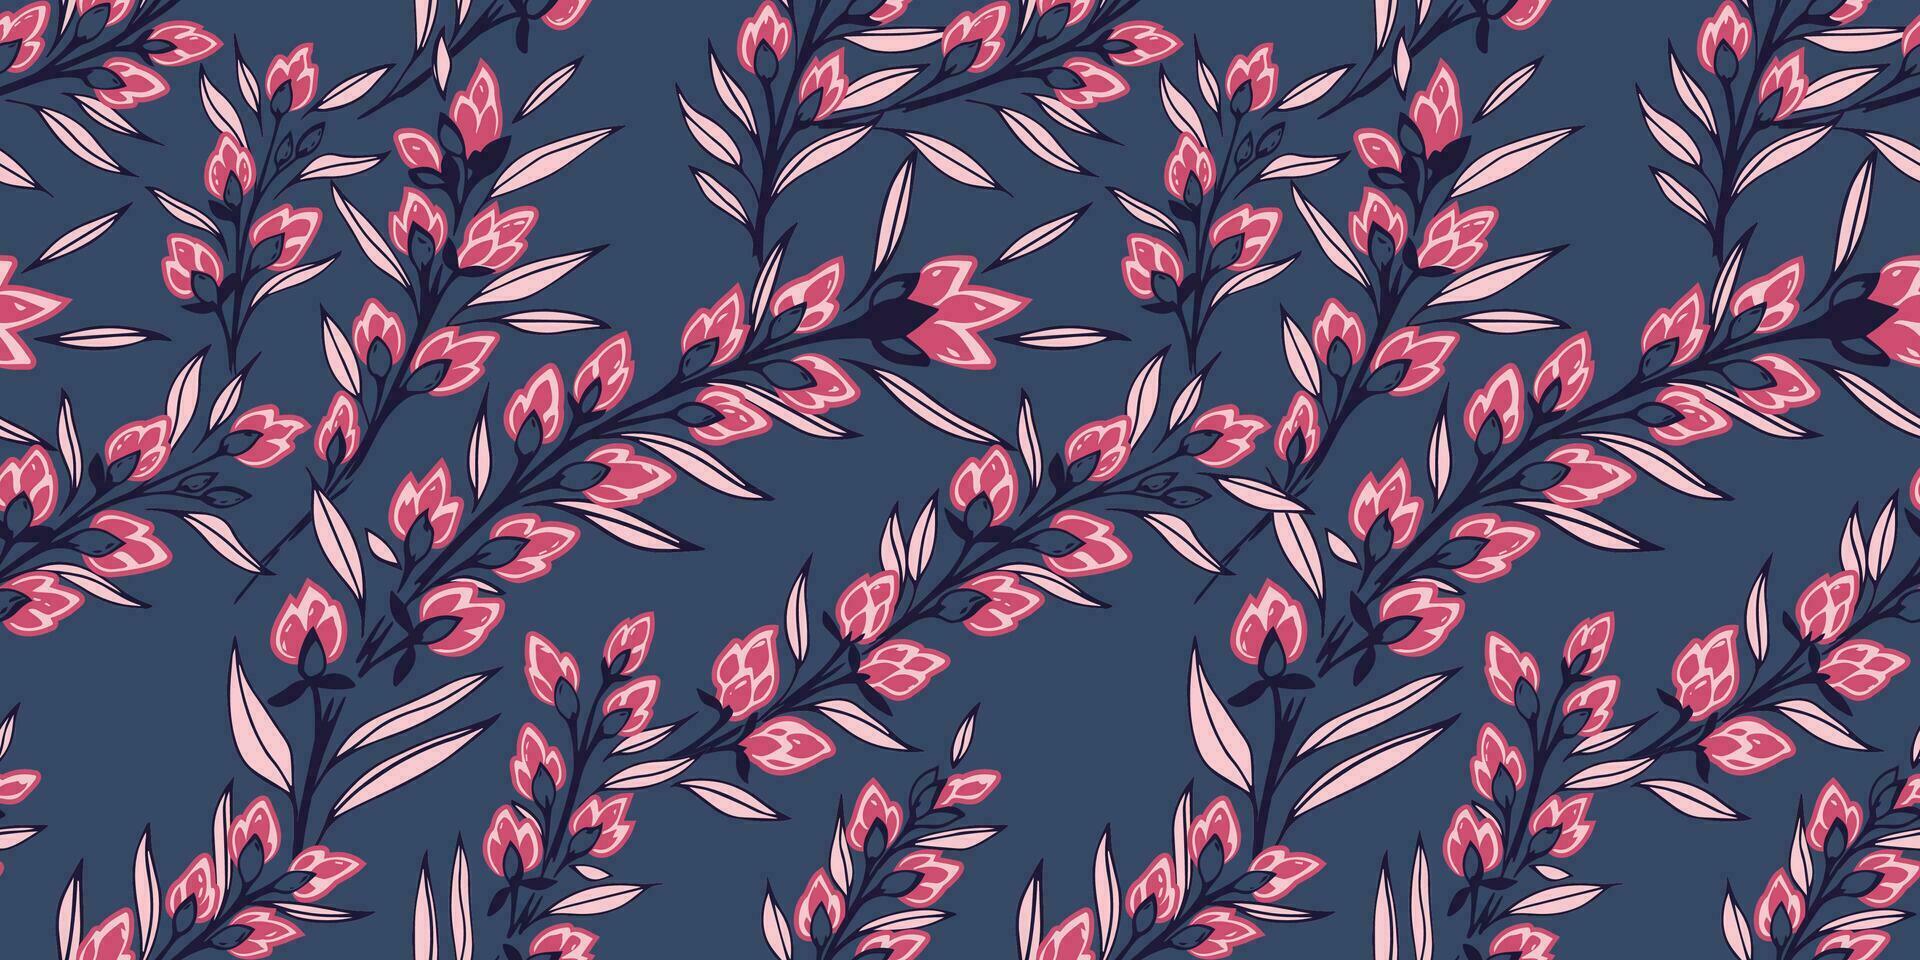 Creative stylized branches leaves with buds flowers intertwined in a seamless pattern. Vector hand drawn. Abstract art floral print on a dark background. Design for fashion, fabric, wallpaper.